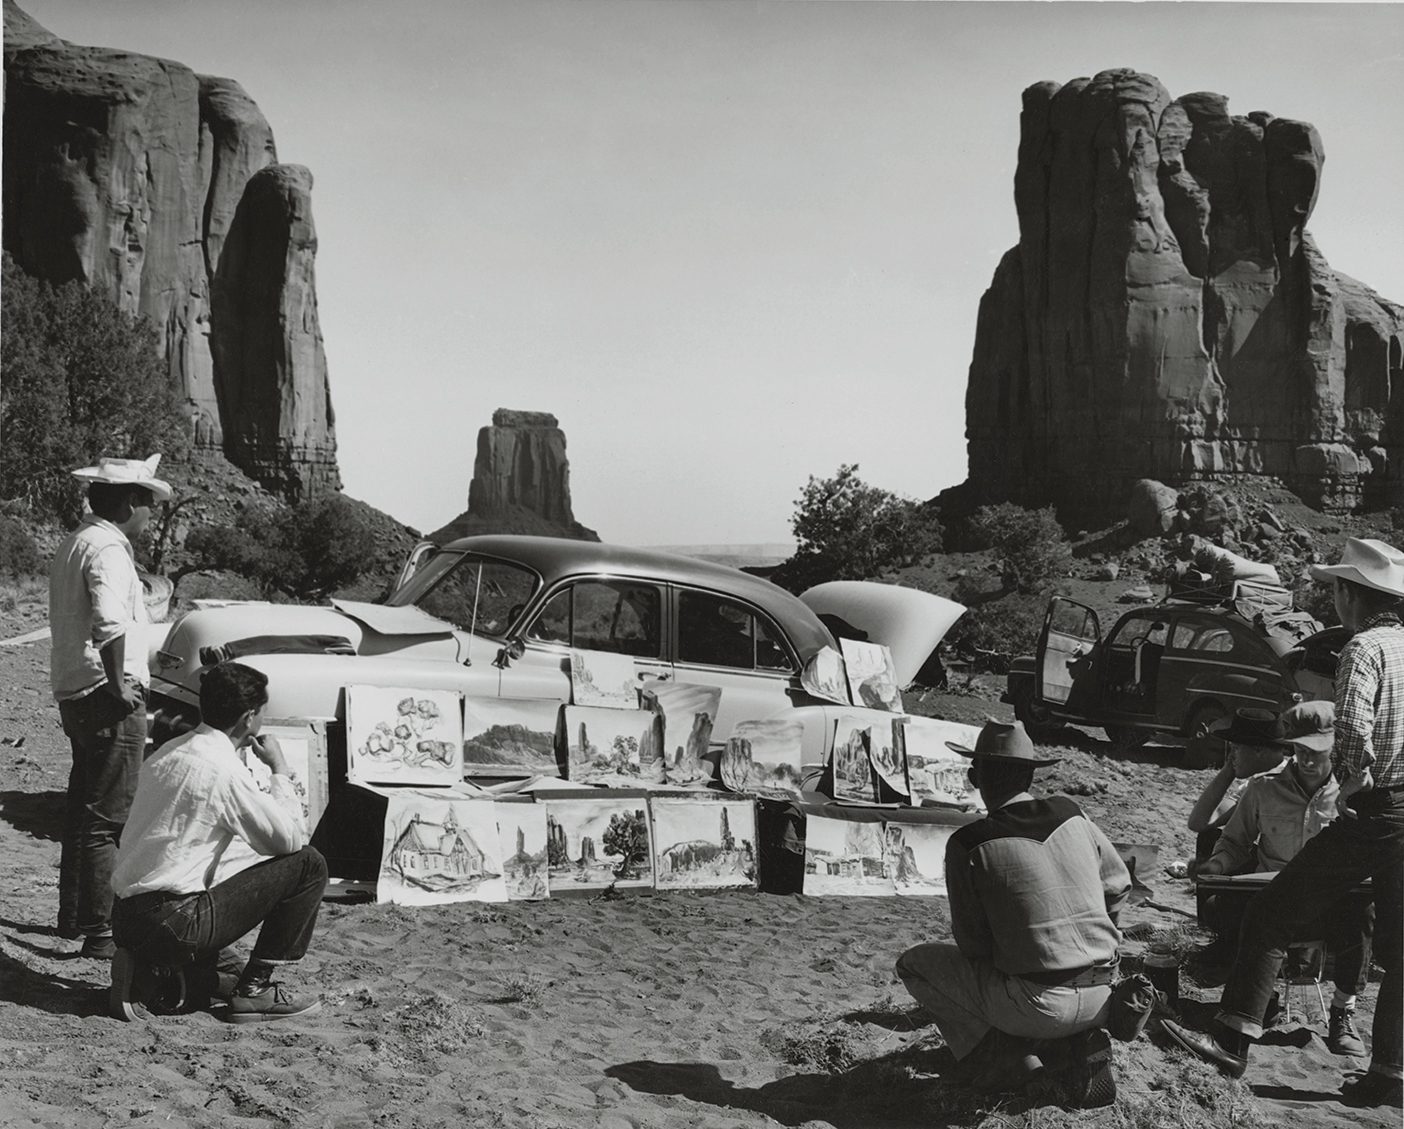 Art students look at a collection of art pieces leaning against a car at the base of a red-rock landscape.